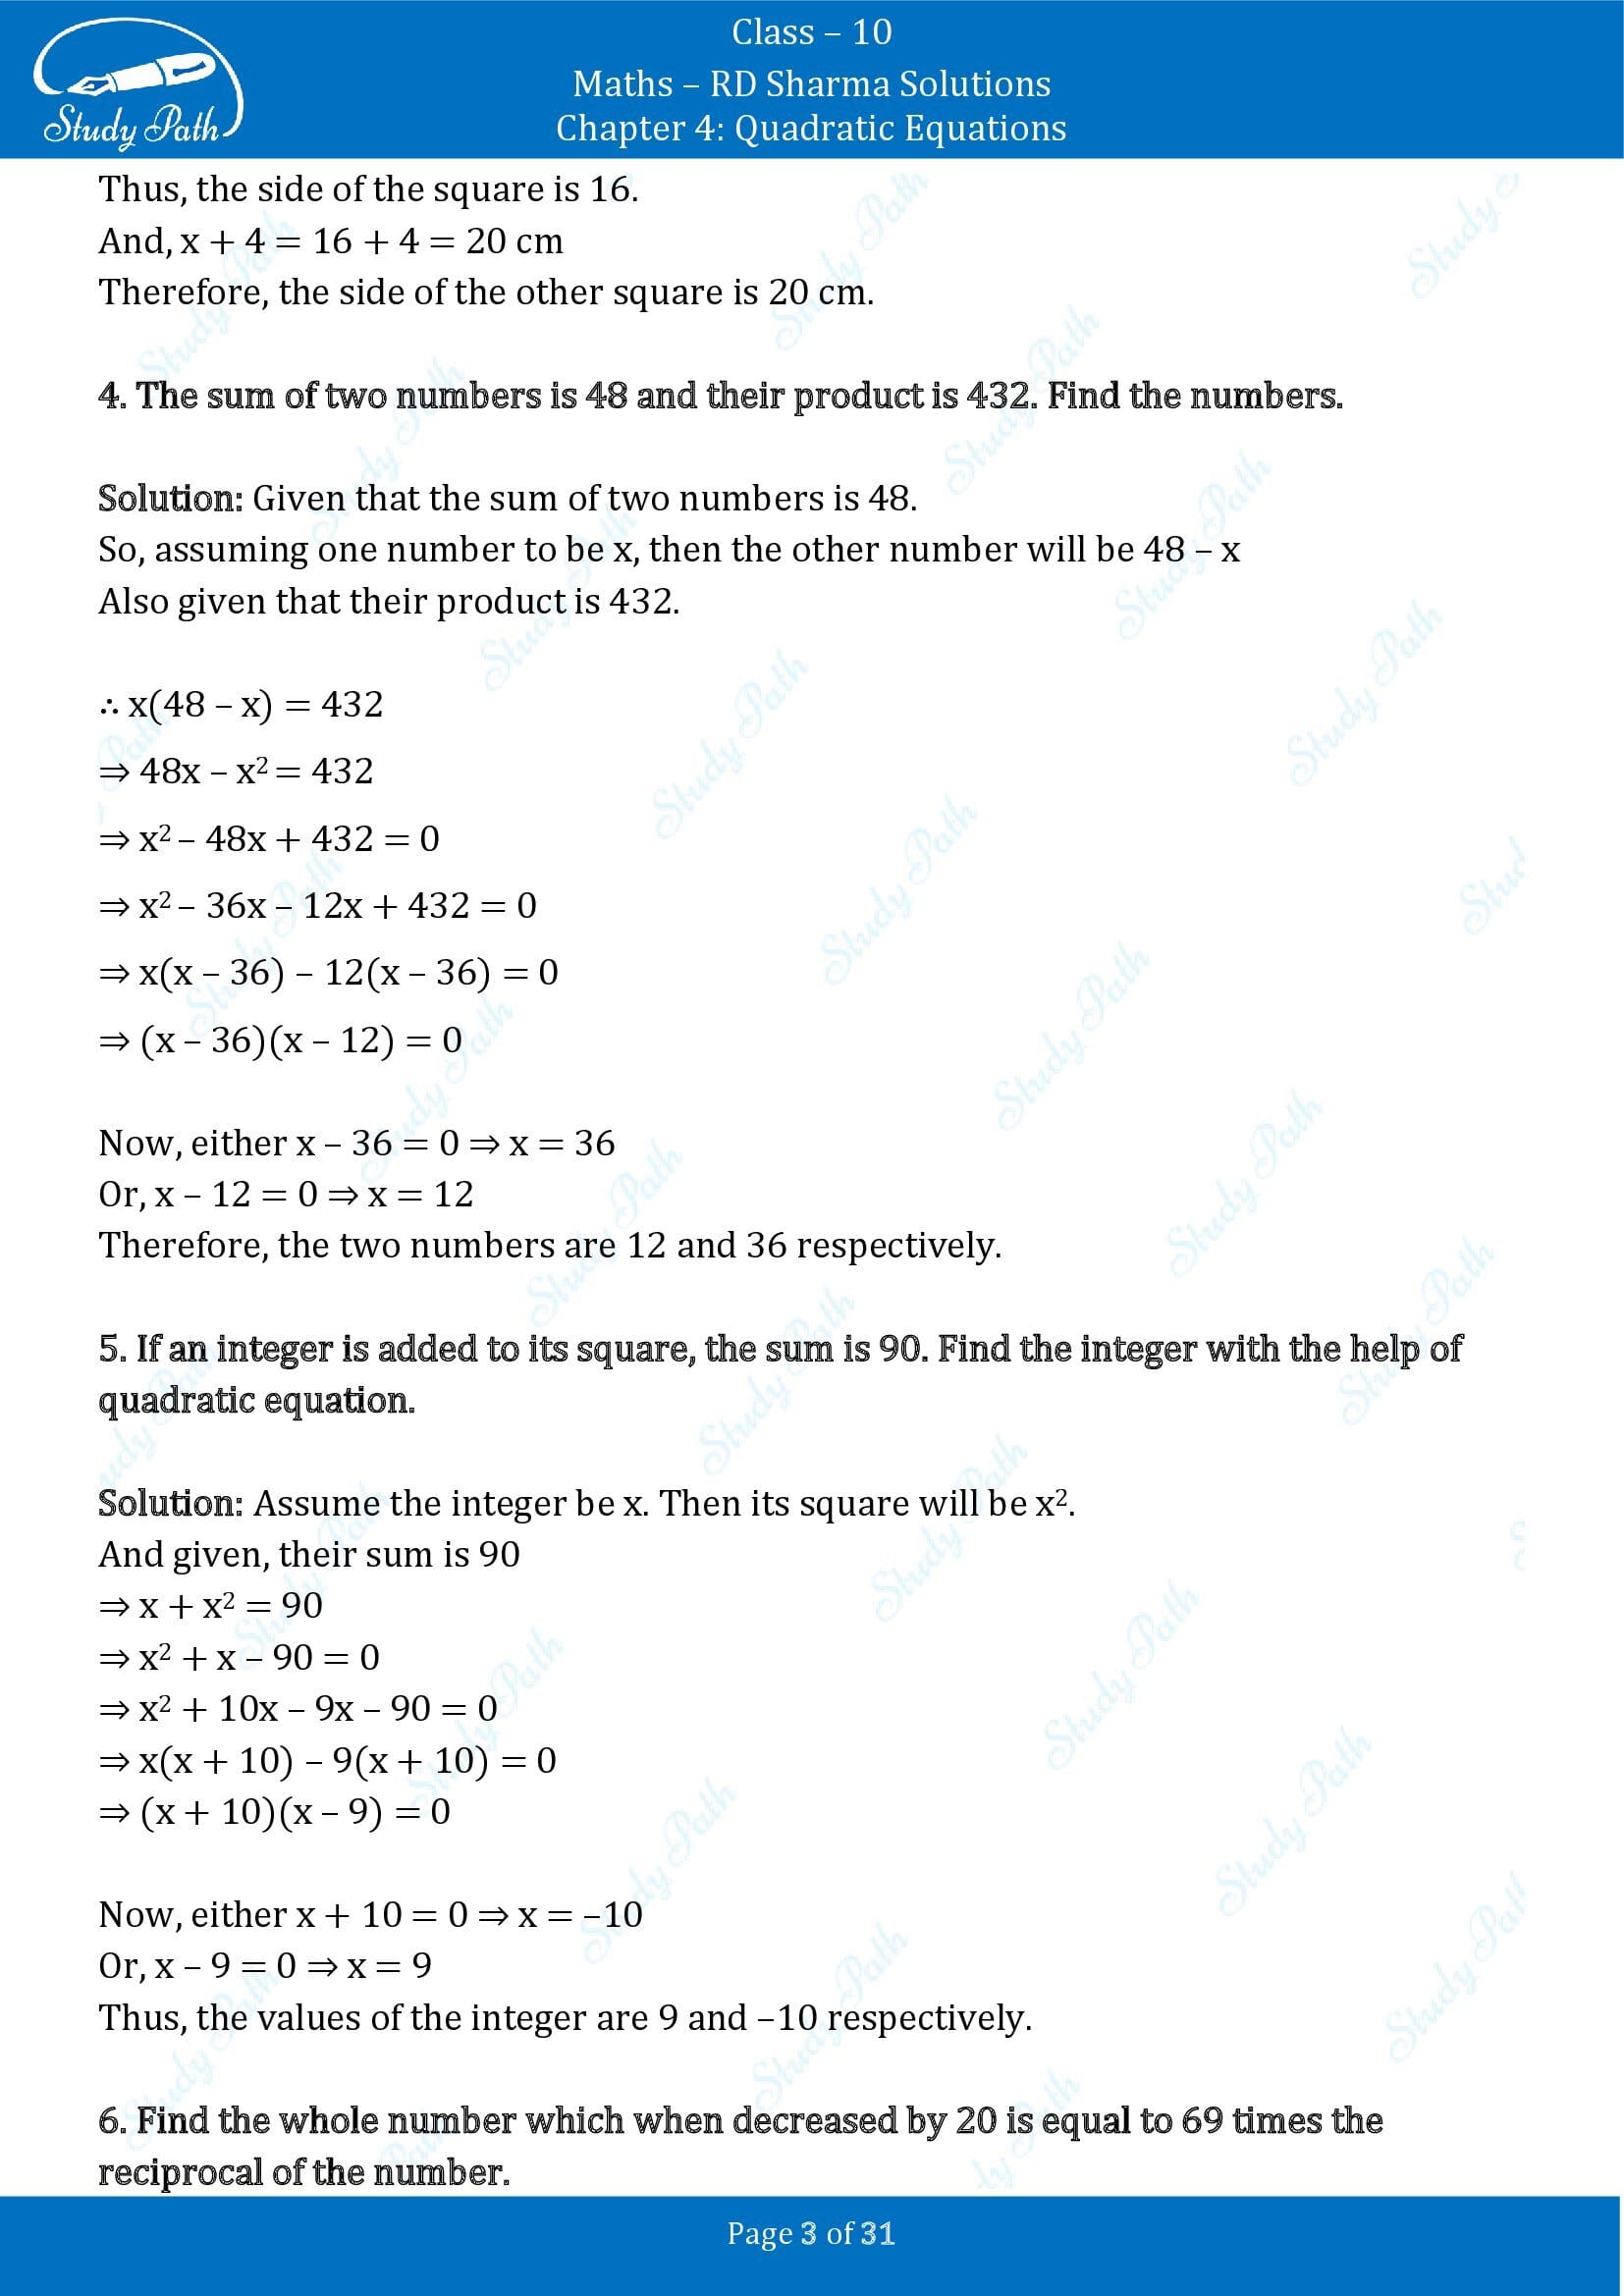 RD Sharma Solutions Class 10 Chapter 4 Quadratic Equations Exercise 4.7 00003